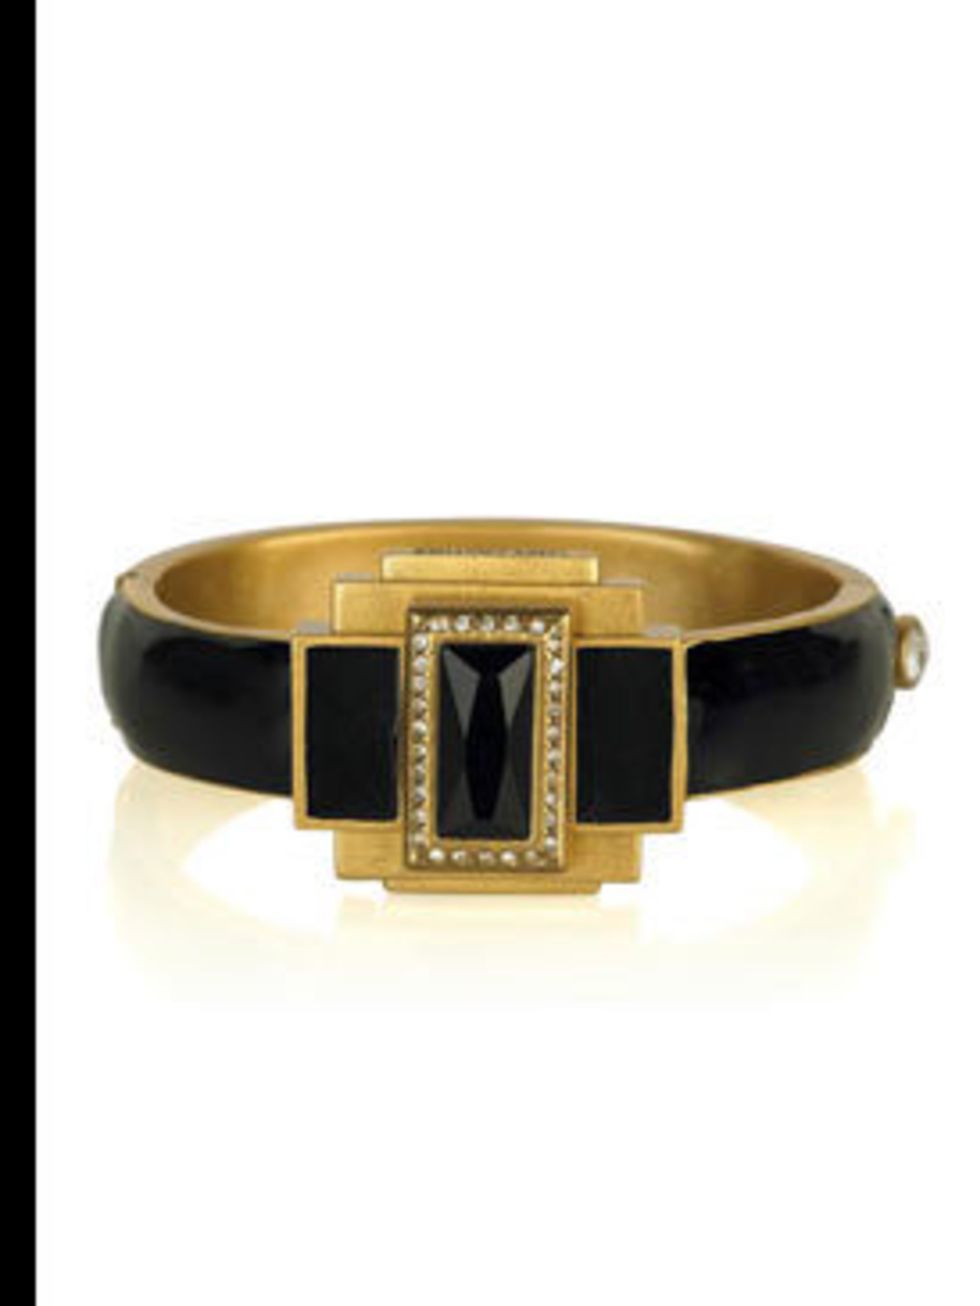 <p>Bracelet, £115 by Juicy Couture at <a href="http://www.net-a-porter.com/product/47617">Net A Porter</a></p>